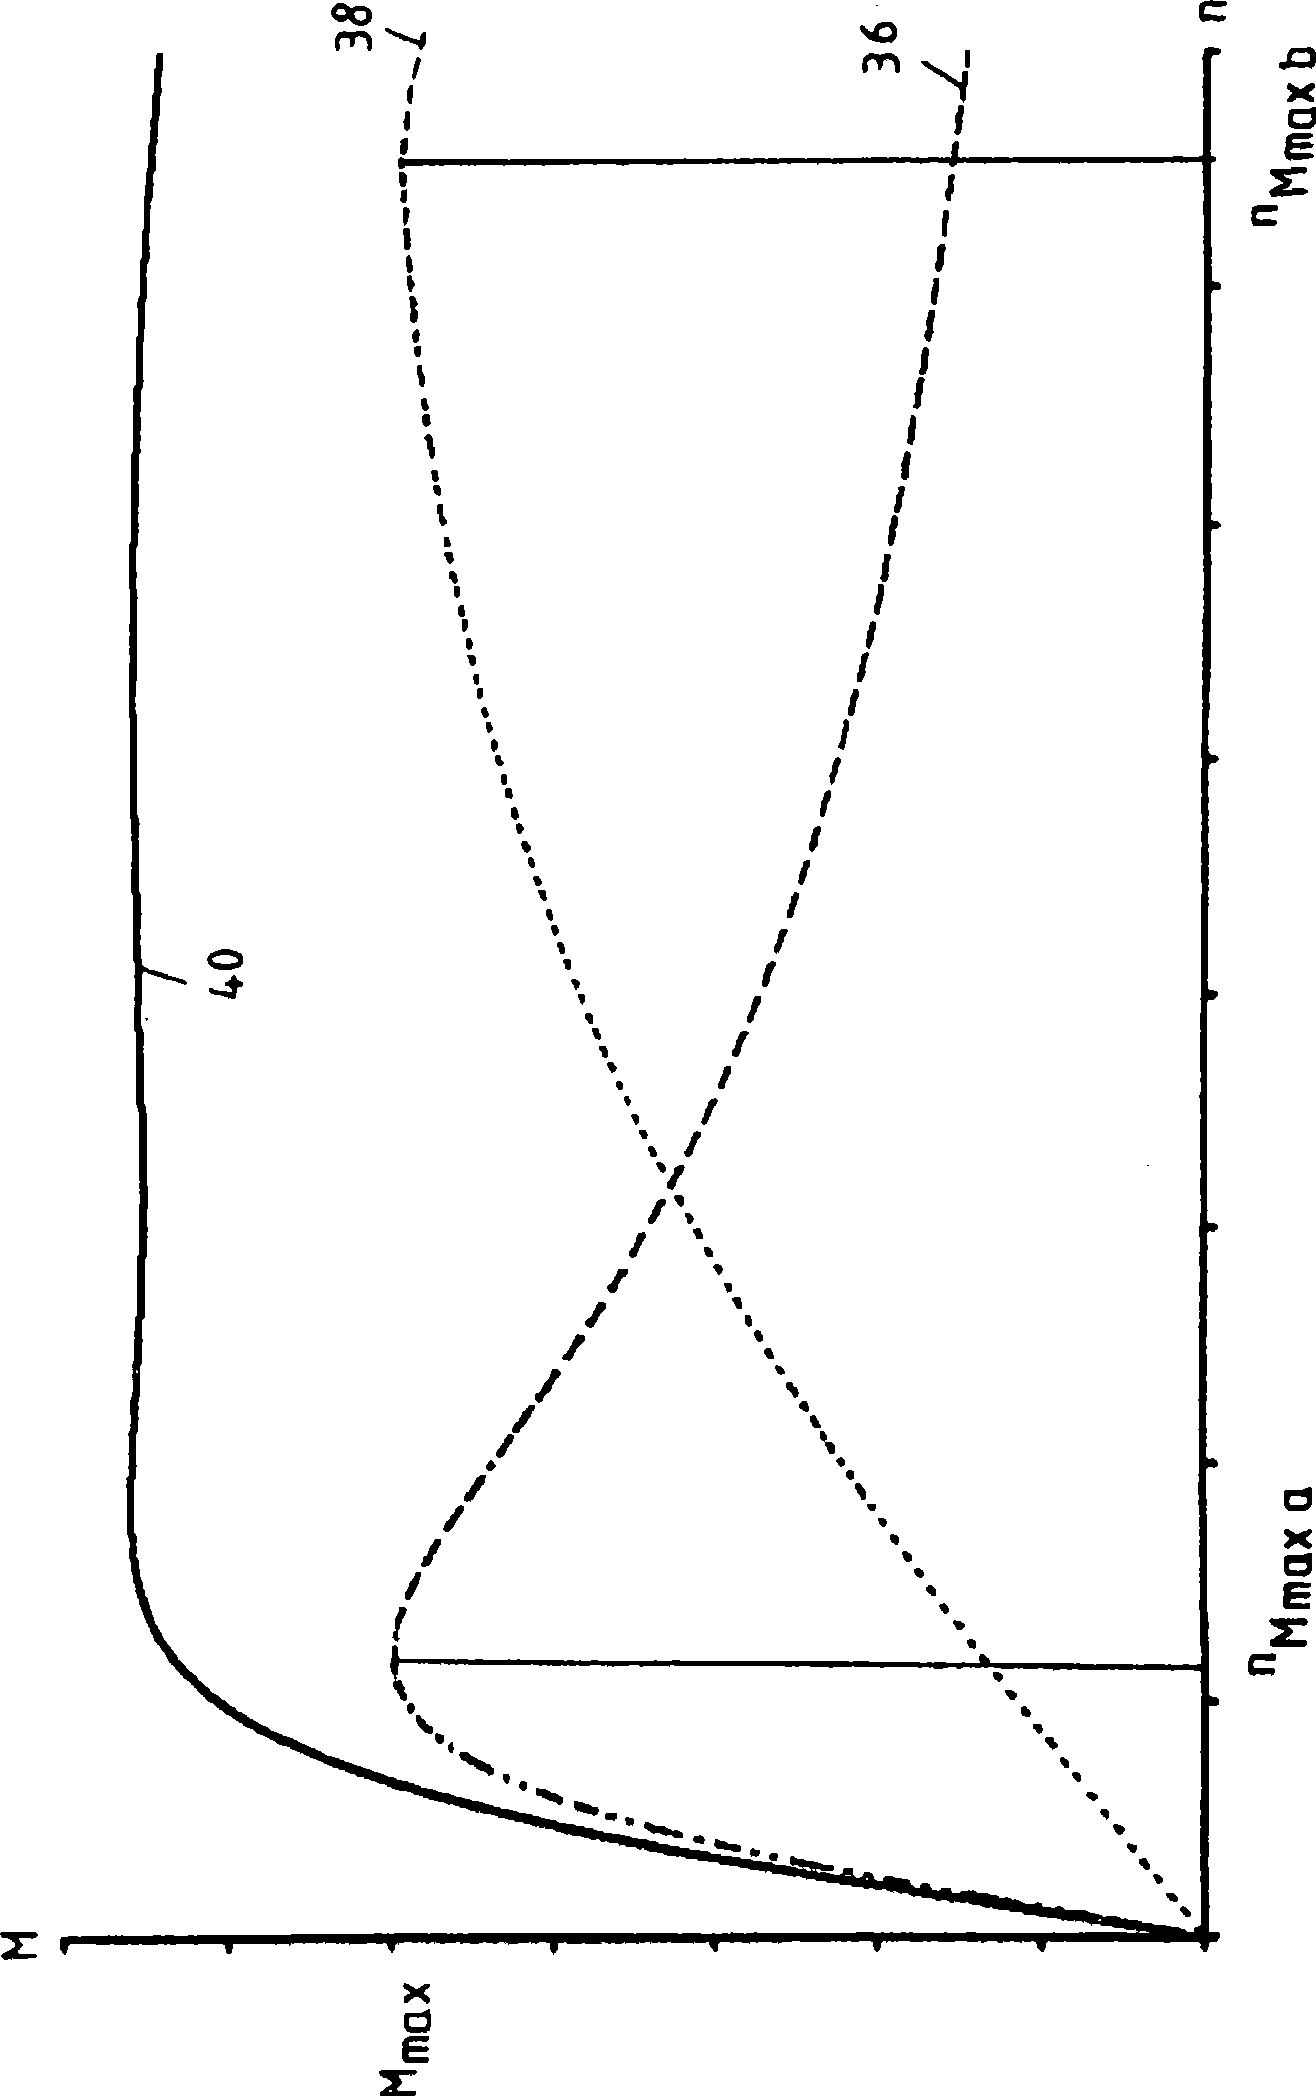 Traction drive of a rail vehicle for driving and generative braking